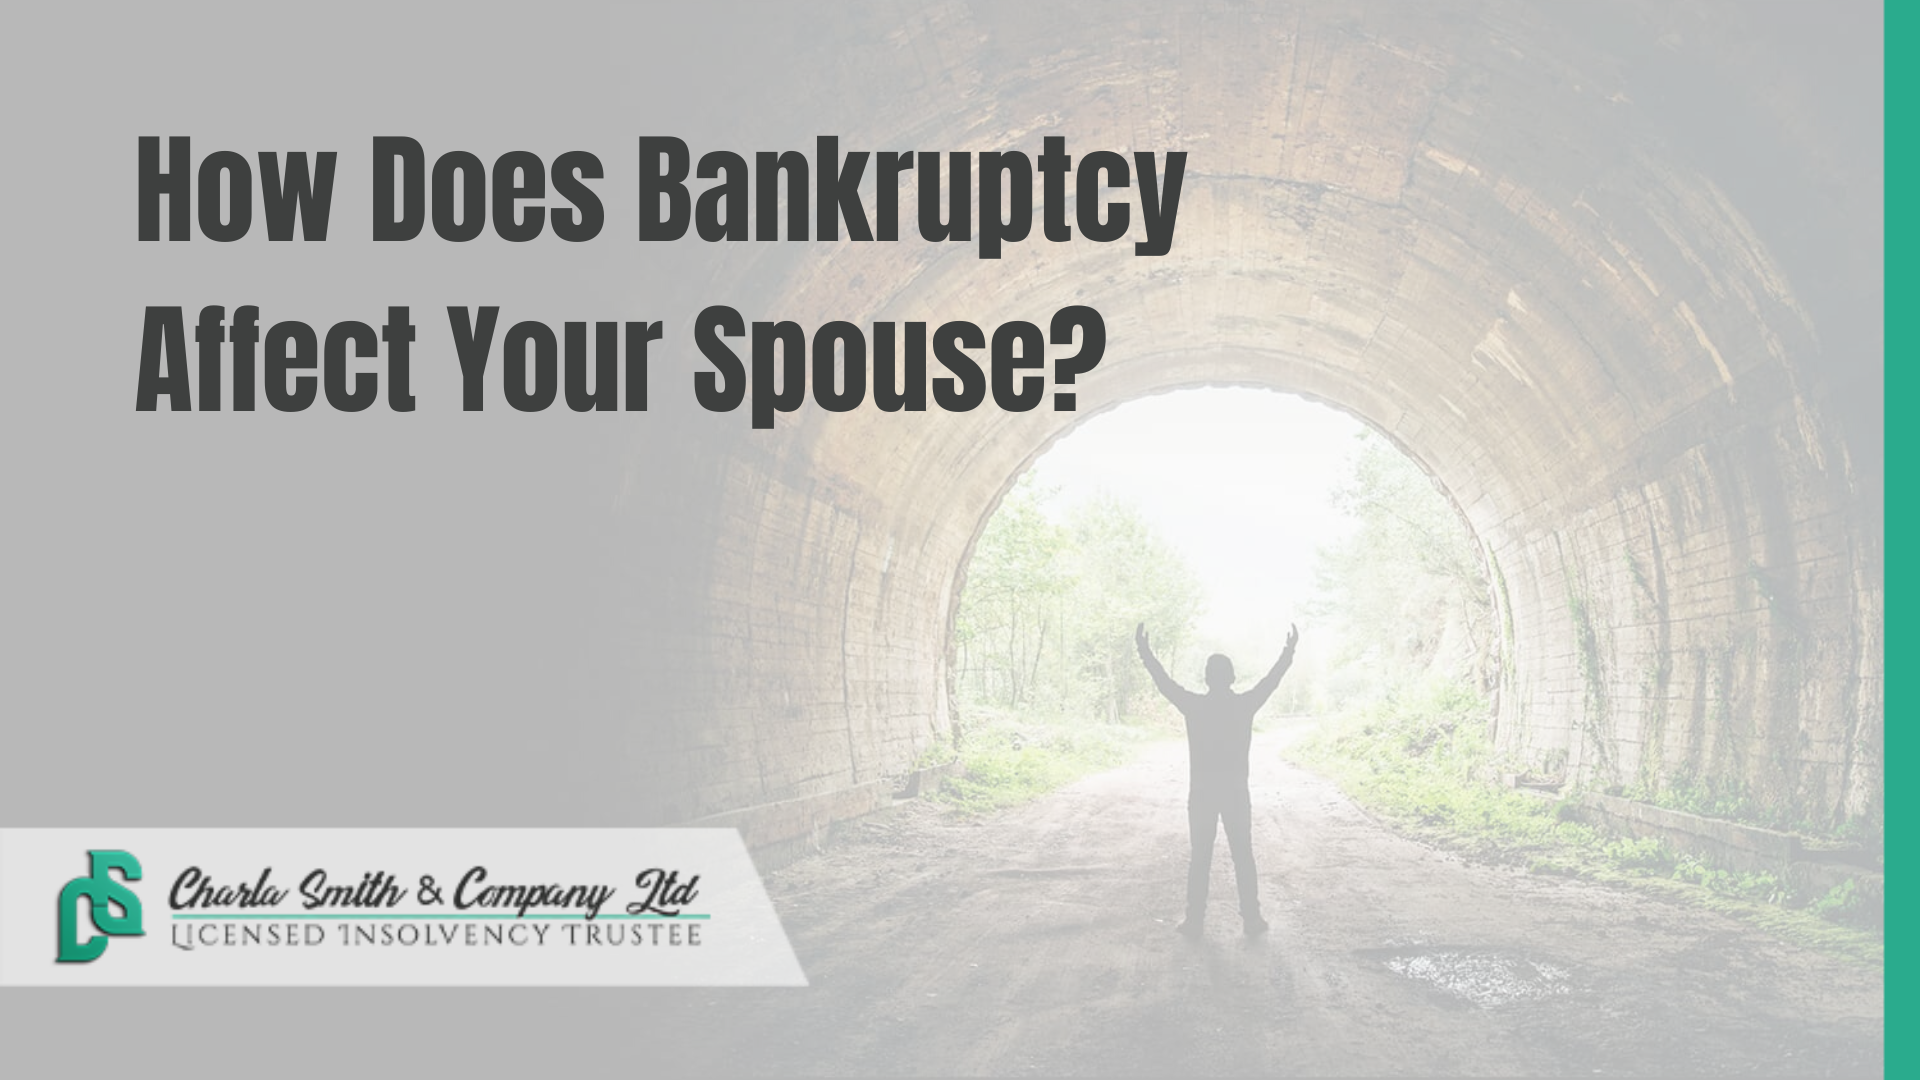 How Does Bankruptcy Affect Your Spouse?